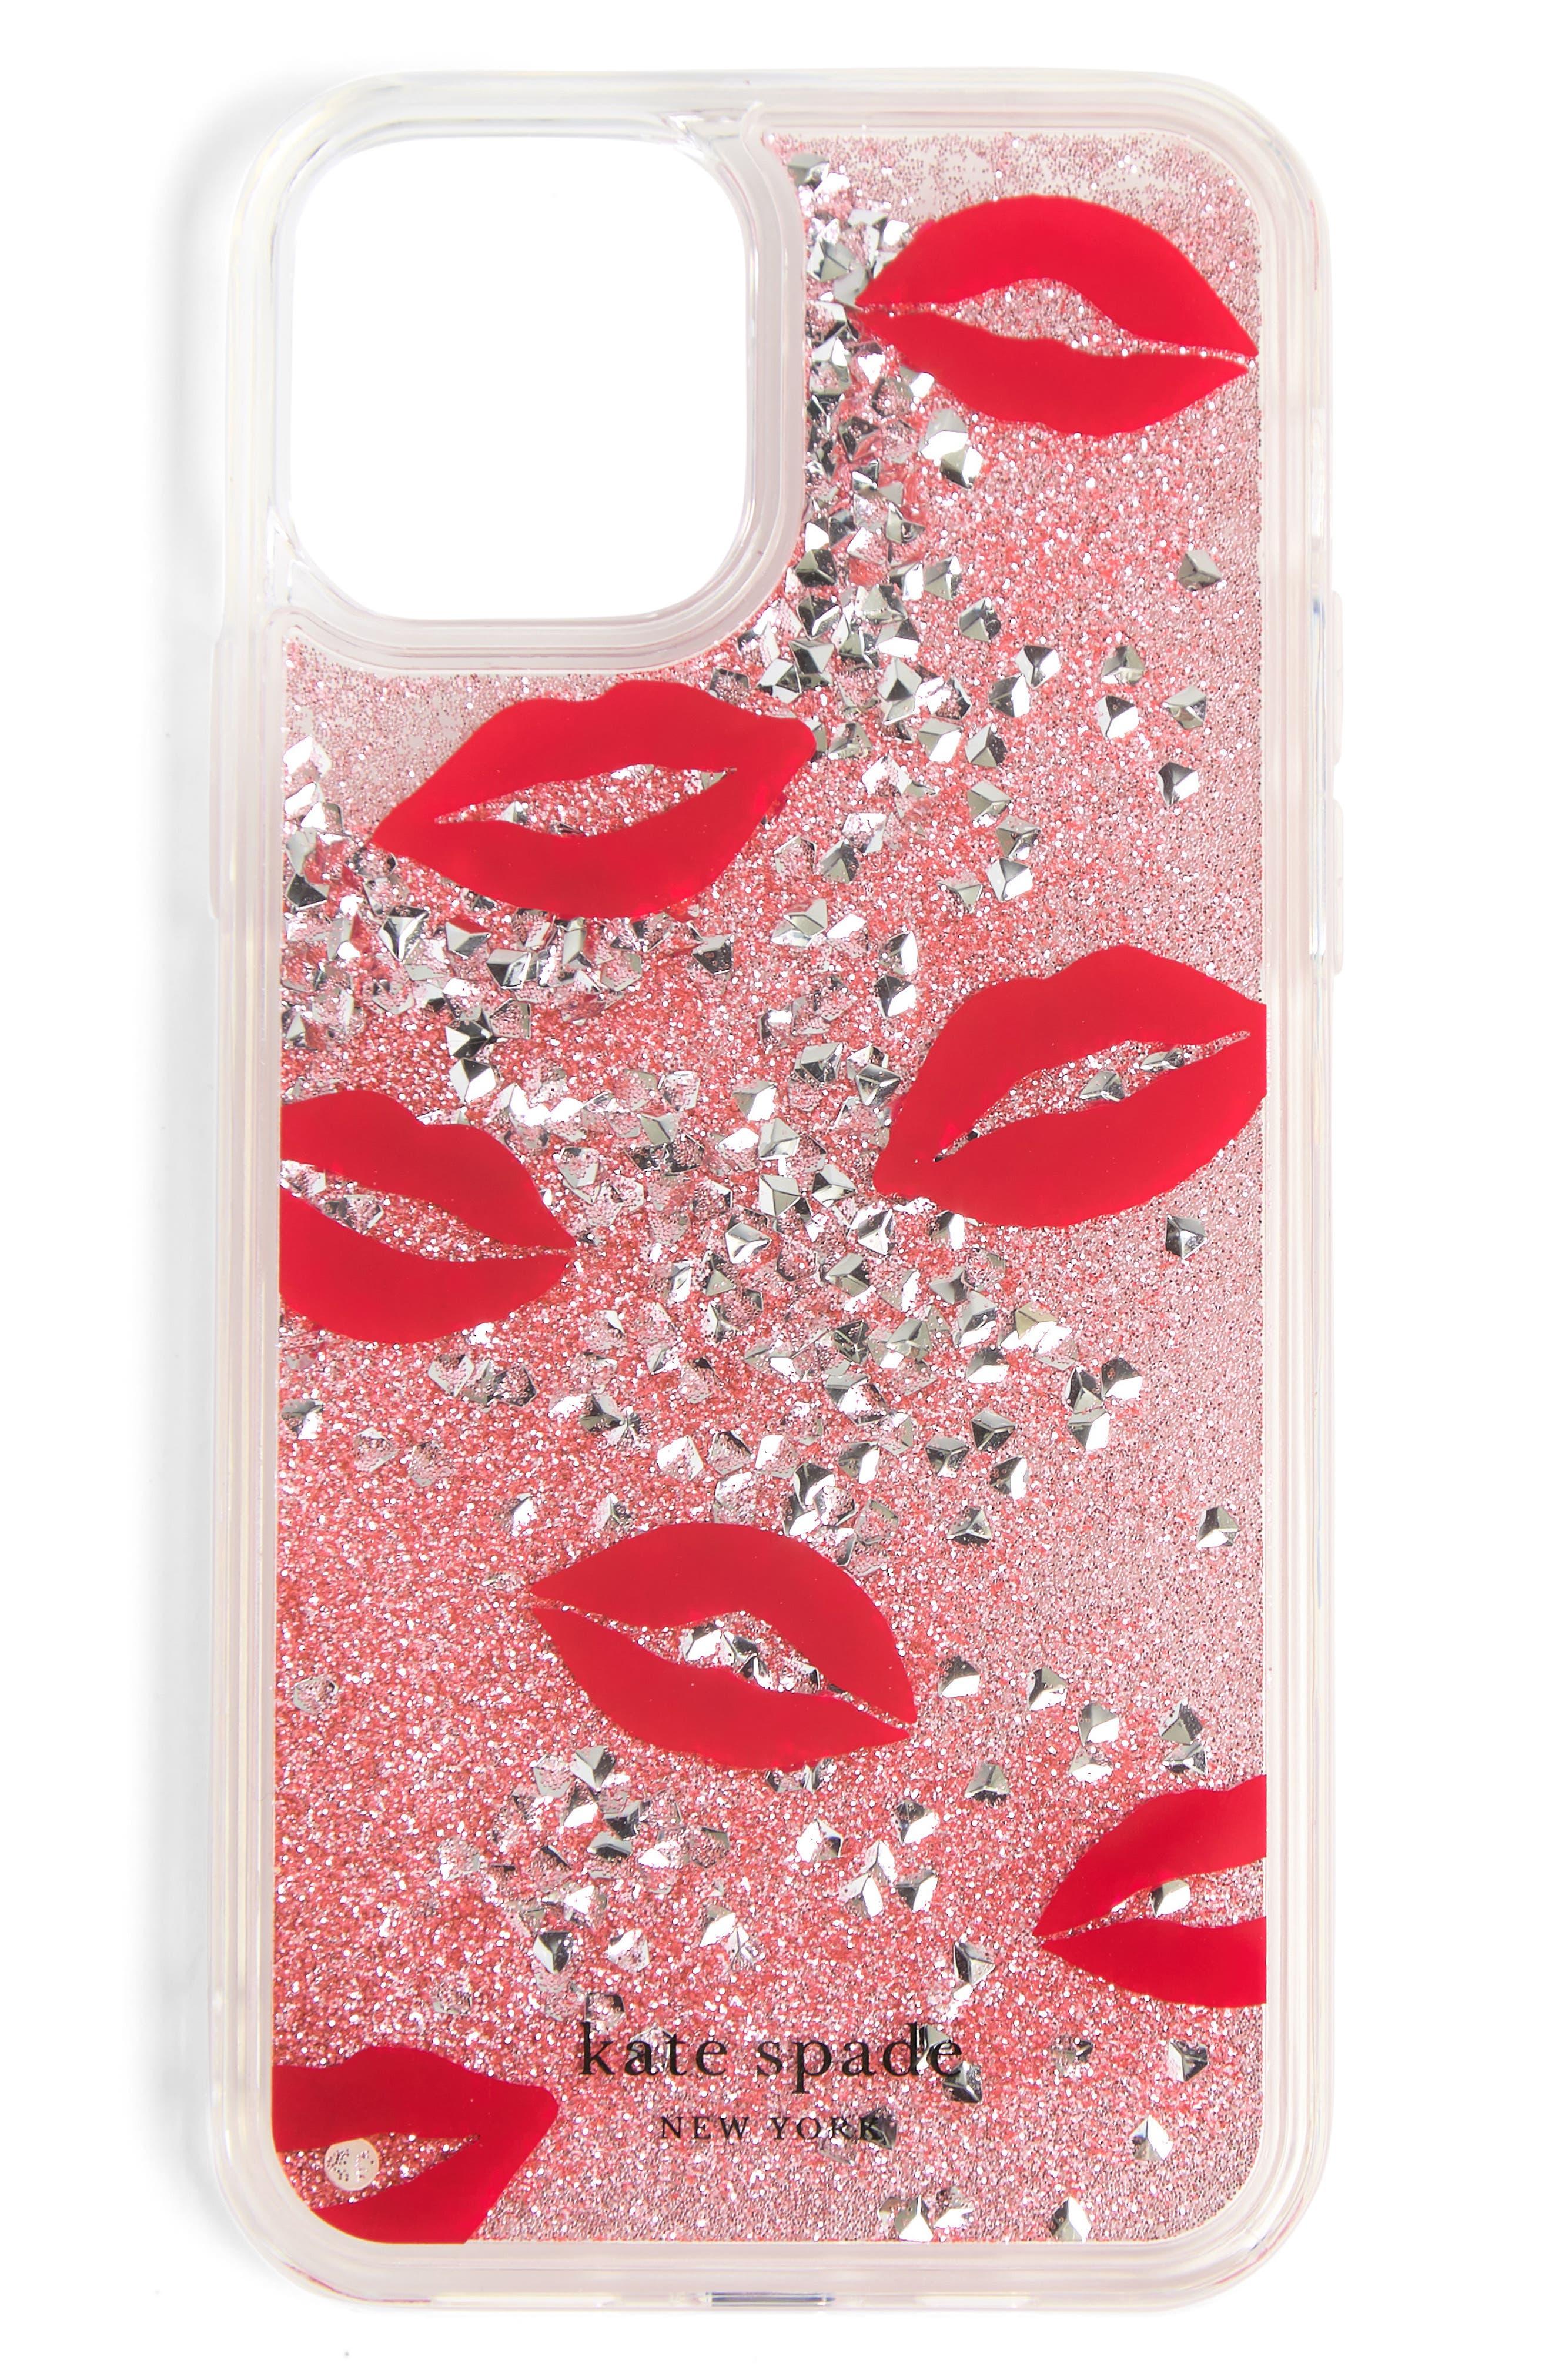 Buy KATE SPADE Lips Liquid Glitter iPhone 12/12 Pro Case, Red Color Tech